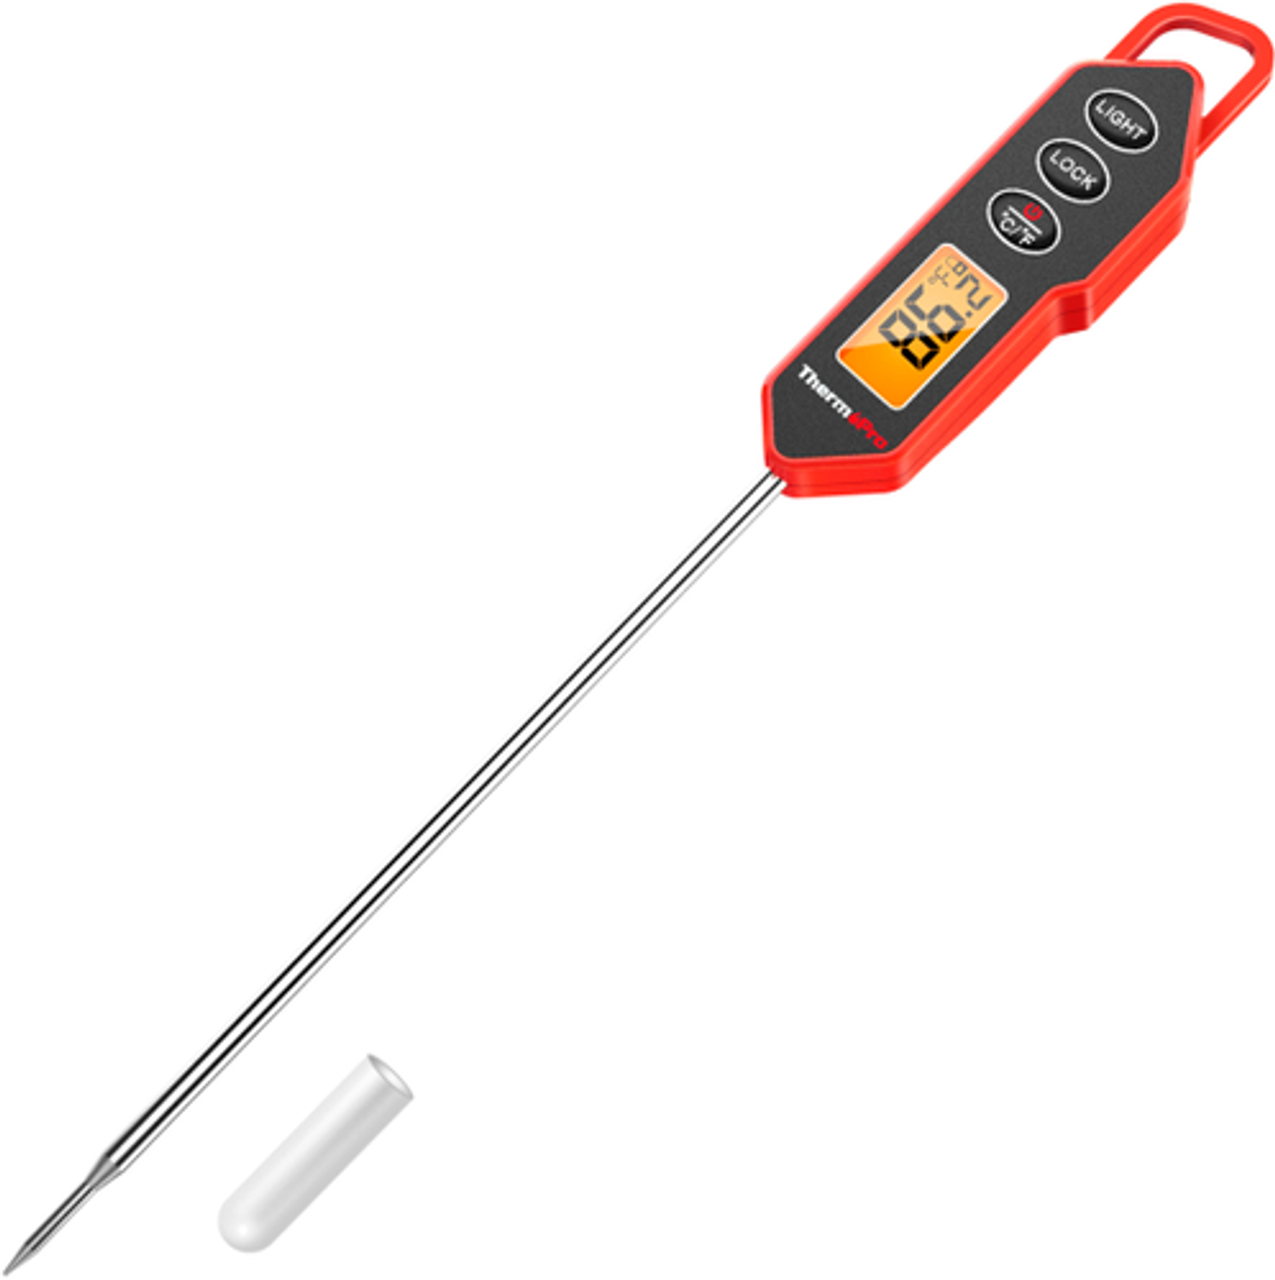 ThermoPro - Digital Instant-Read Meat Thermometer - Red